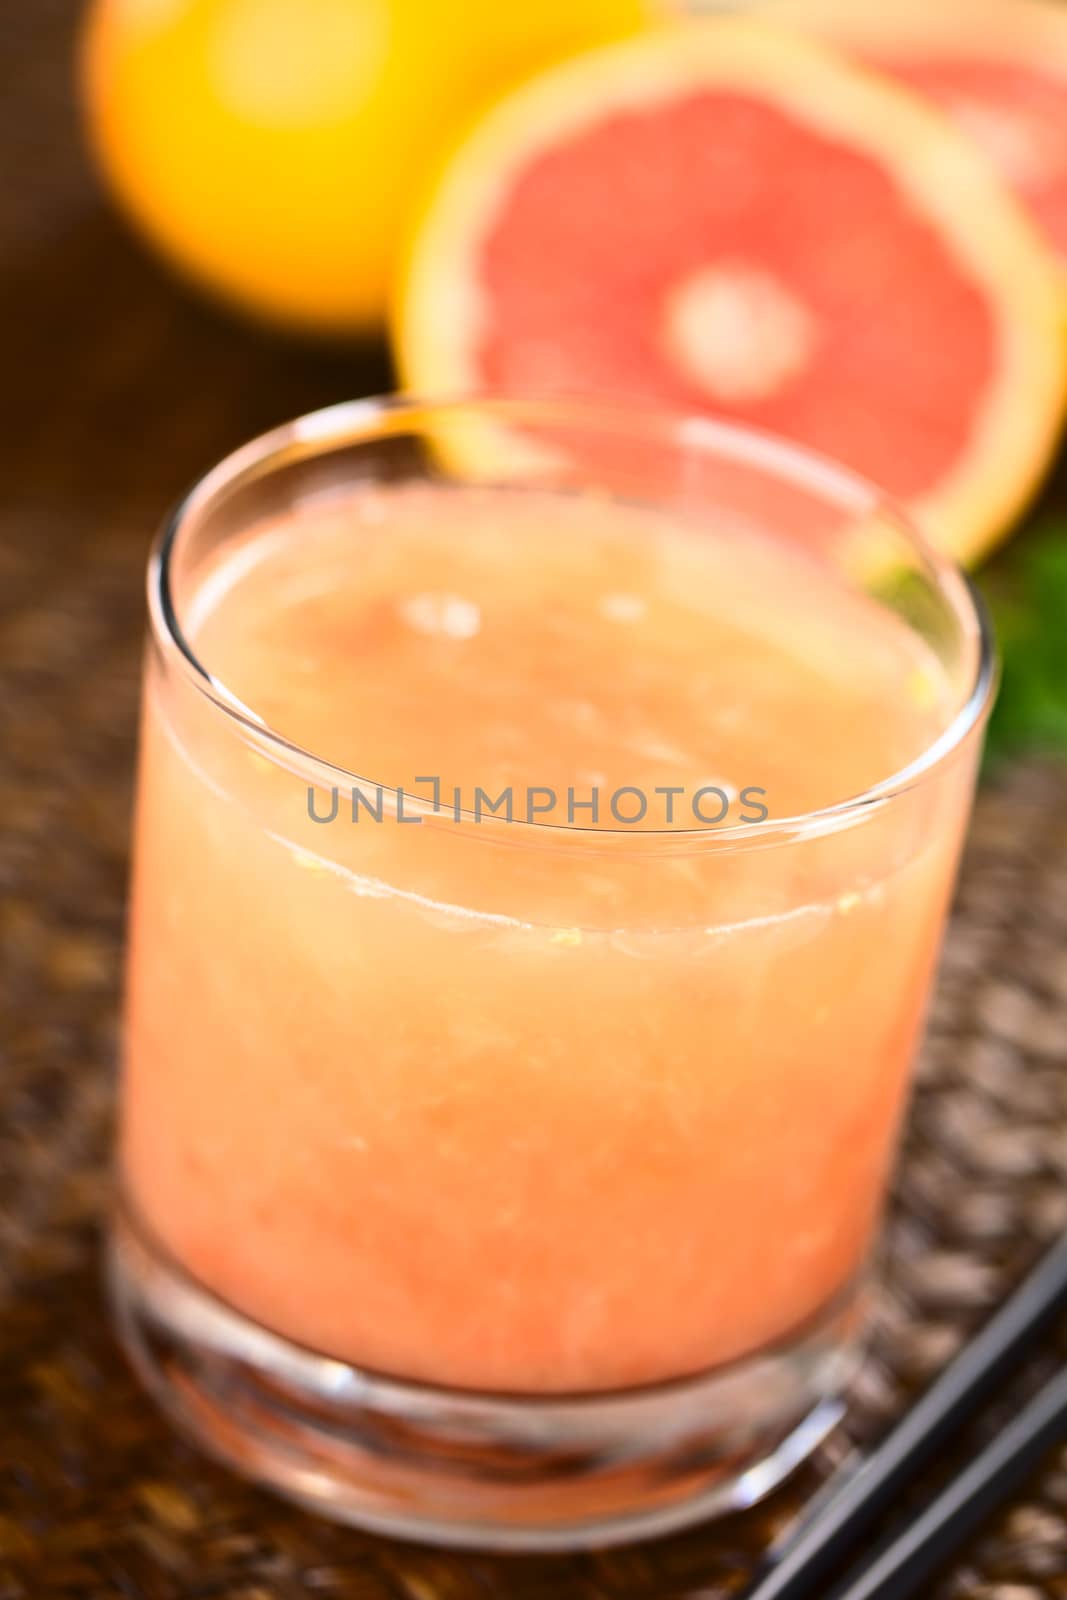 Freshly squeezed juice of the pink-fleshed grapefruit with black drinking straws on the side and grapefruits in the back (Selective Focus, Focus on the front rim of the glass)